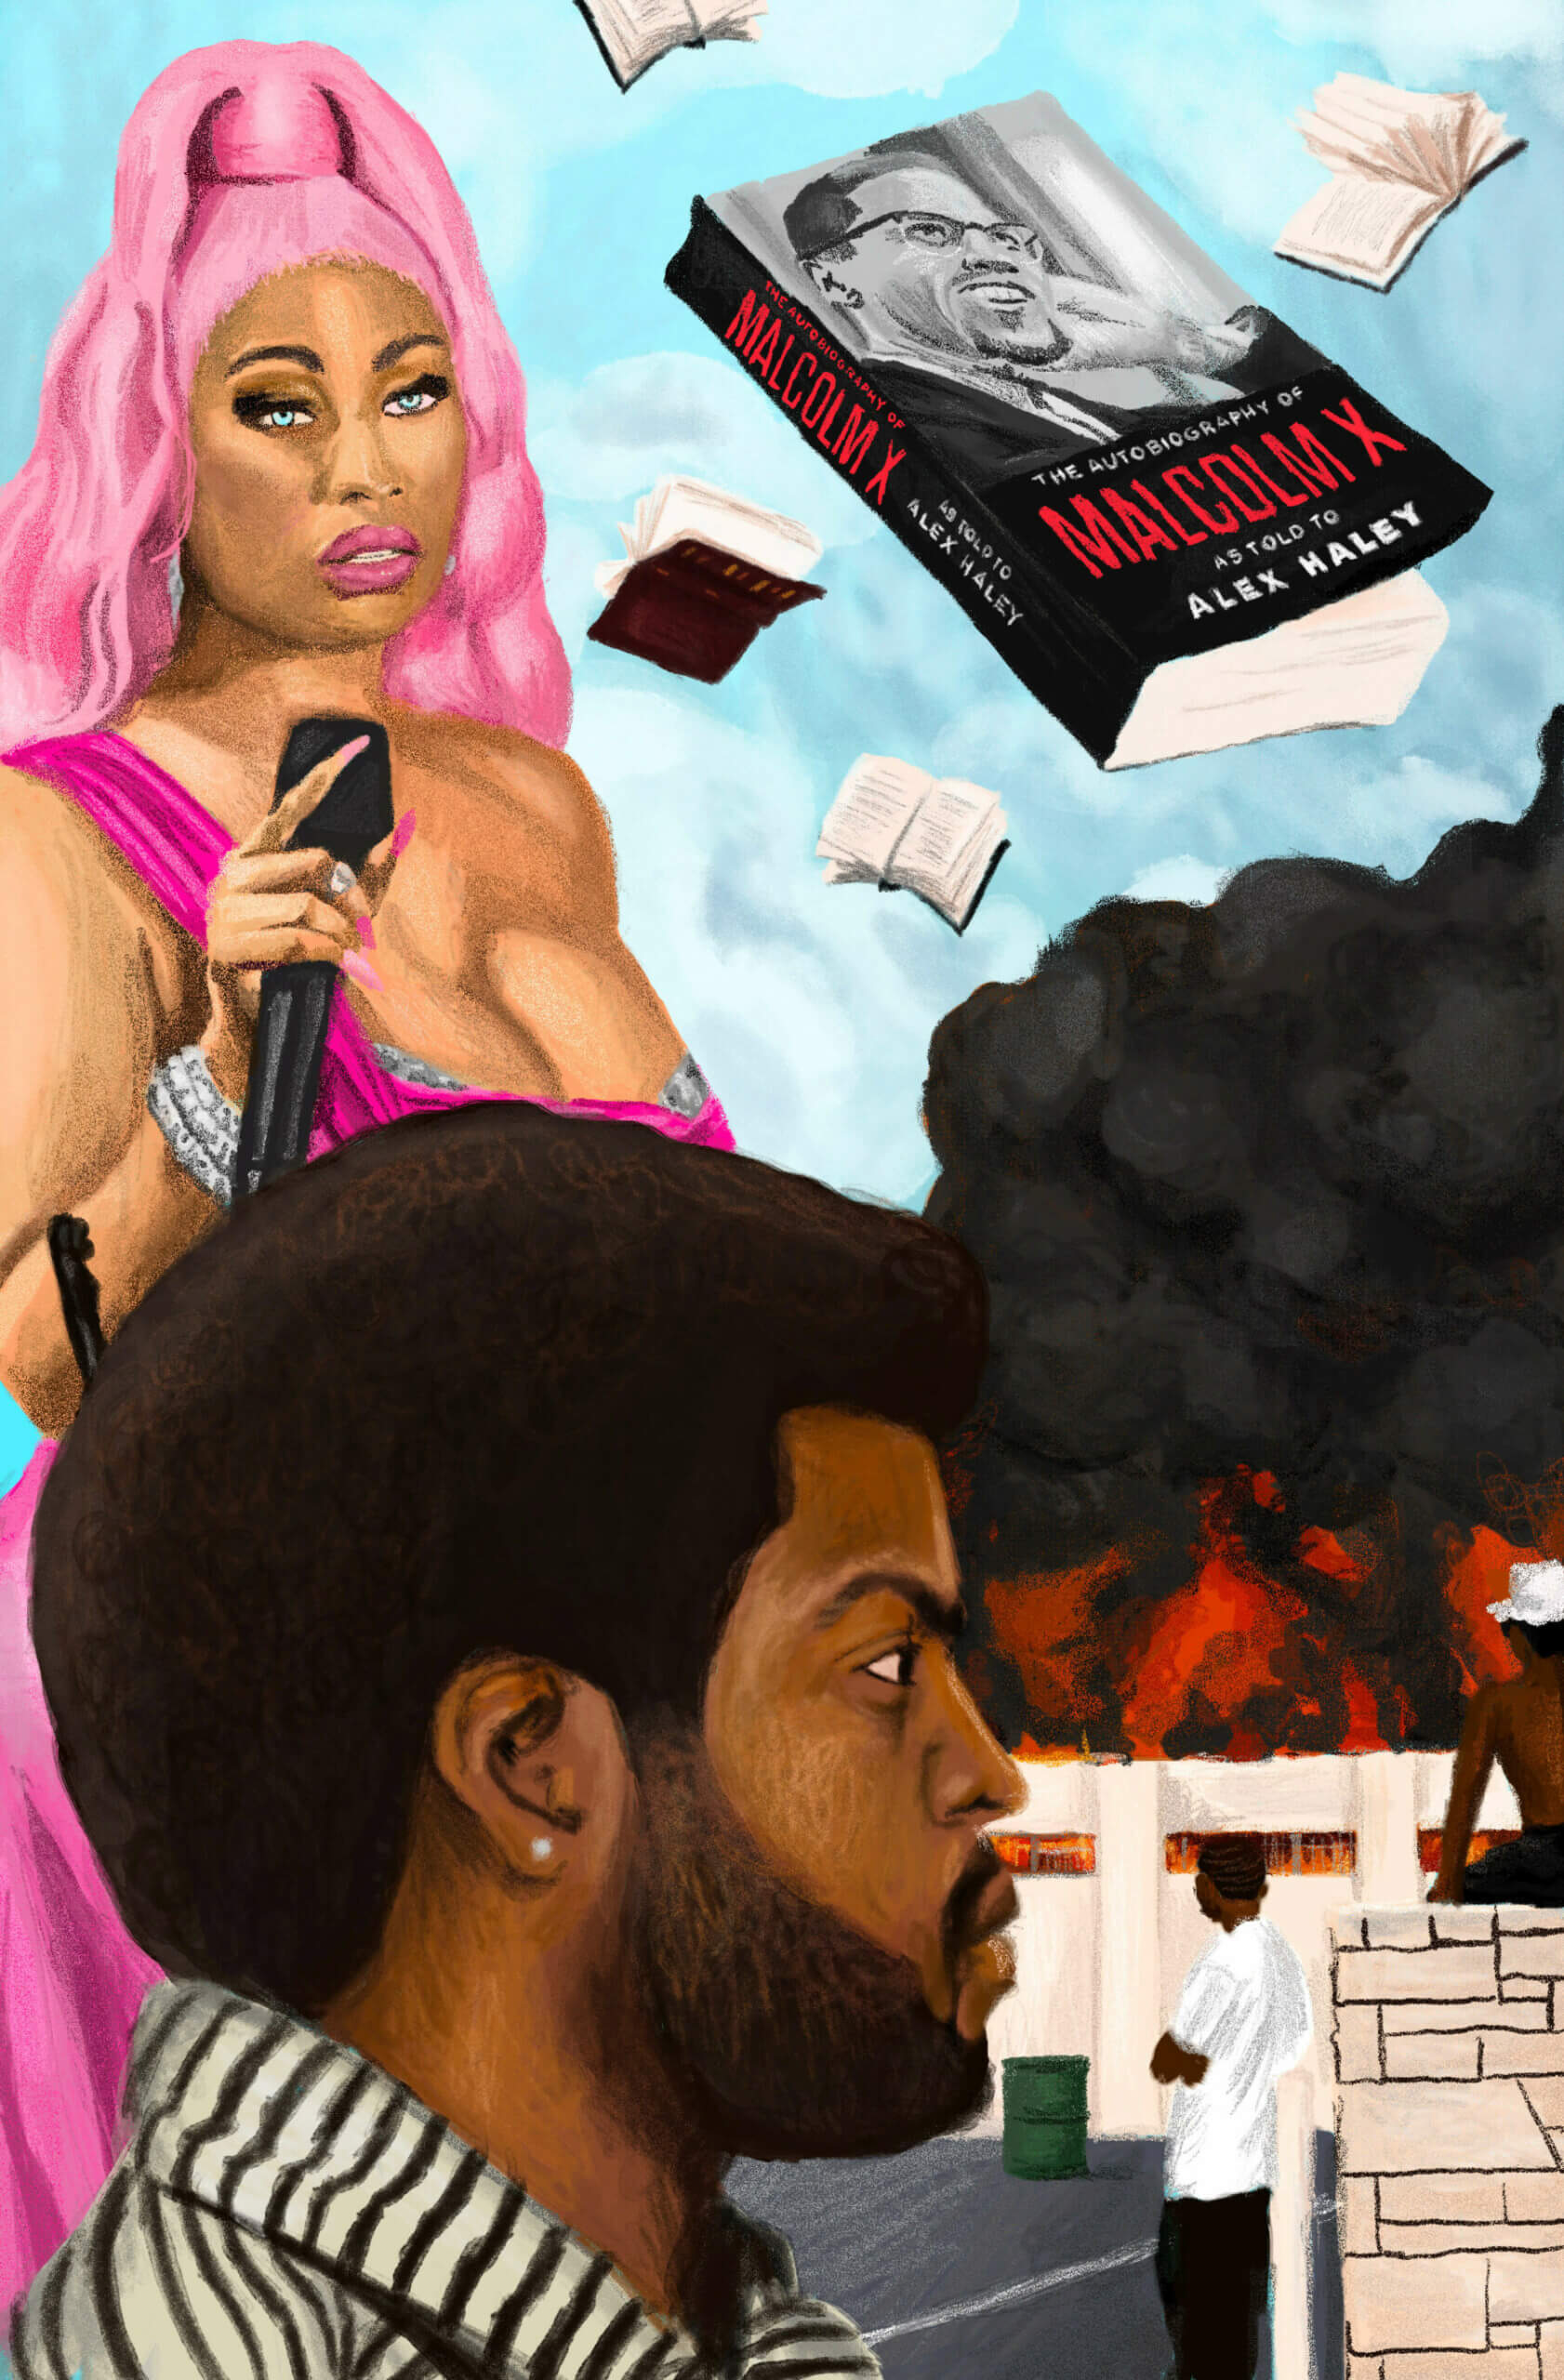 A painting includes a number of subjects, including Nicki Minaj, Ice Cube, a burning commercial building, and copies of Malcom X’s autobiography falling from the sky.